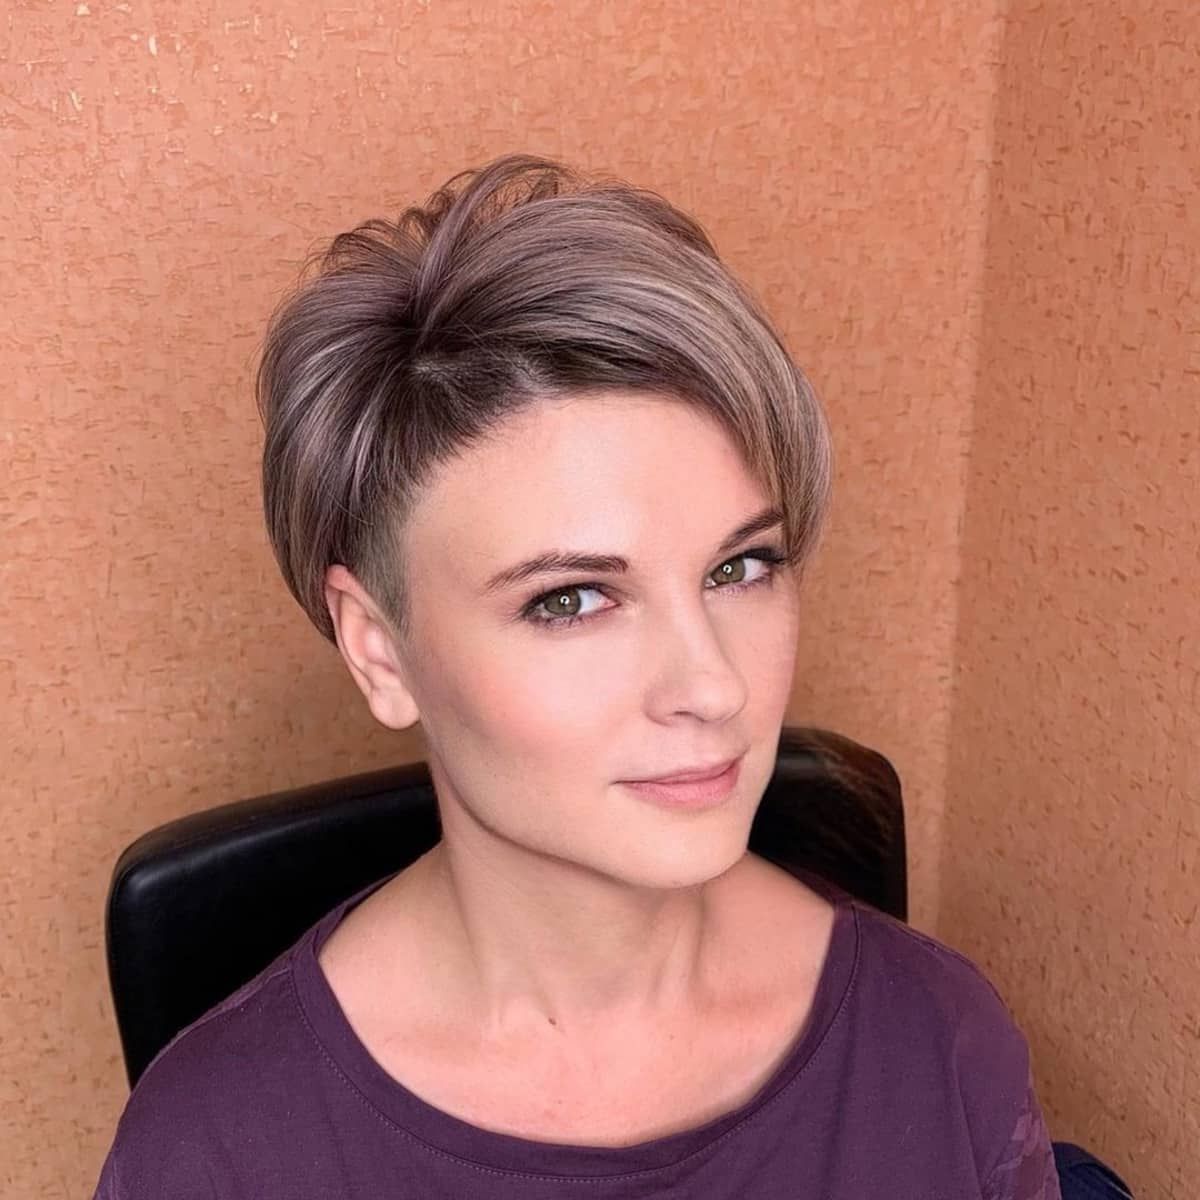 25 Very Short Haircuts For Women Trending In 2022 With Extra Short Women’s Hairstyles Idea (View 6 of 25)